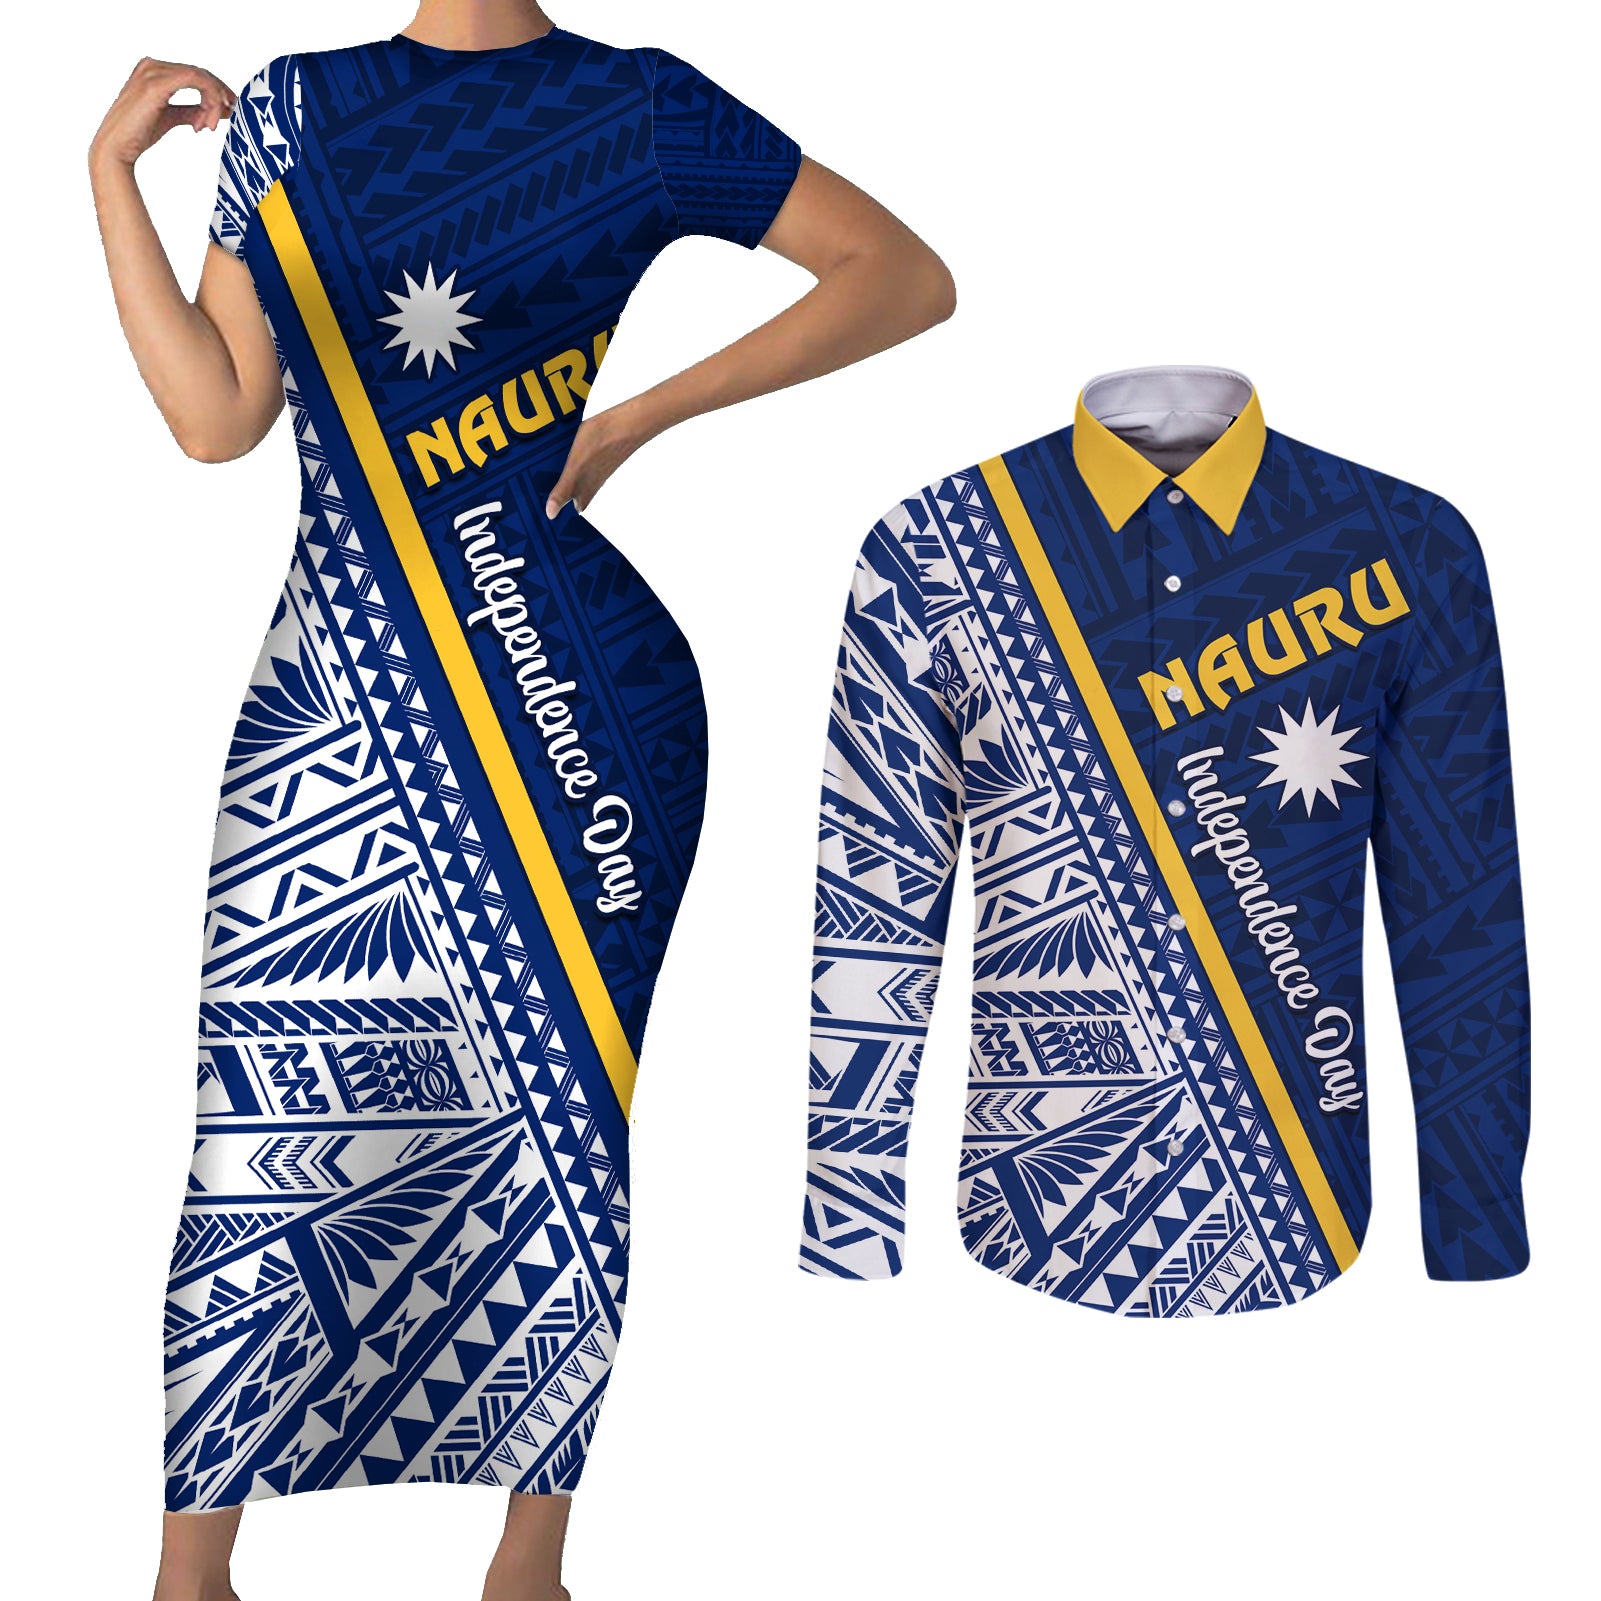 Nauru Independence Day Couples Matching Short Sleeve Bodycon Dress and Long Sleeve Button Shirt Repubrikin Naoero Gods Will First LT01 Blue - Polynesian Pride